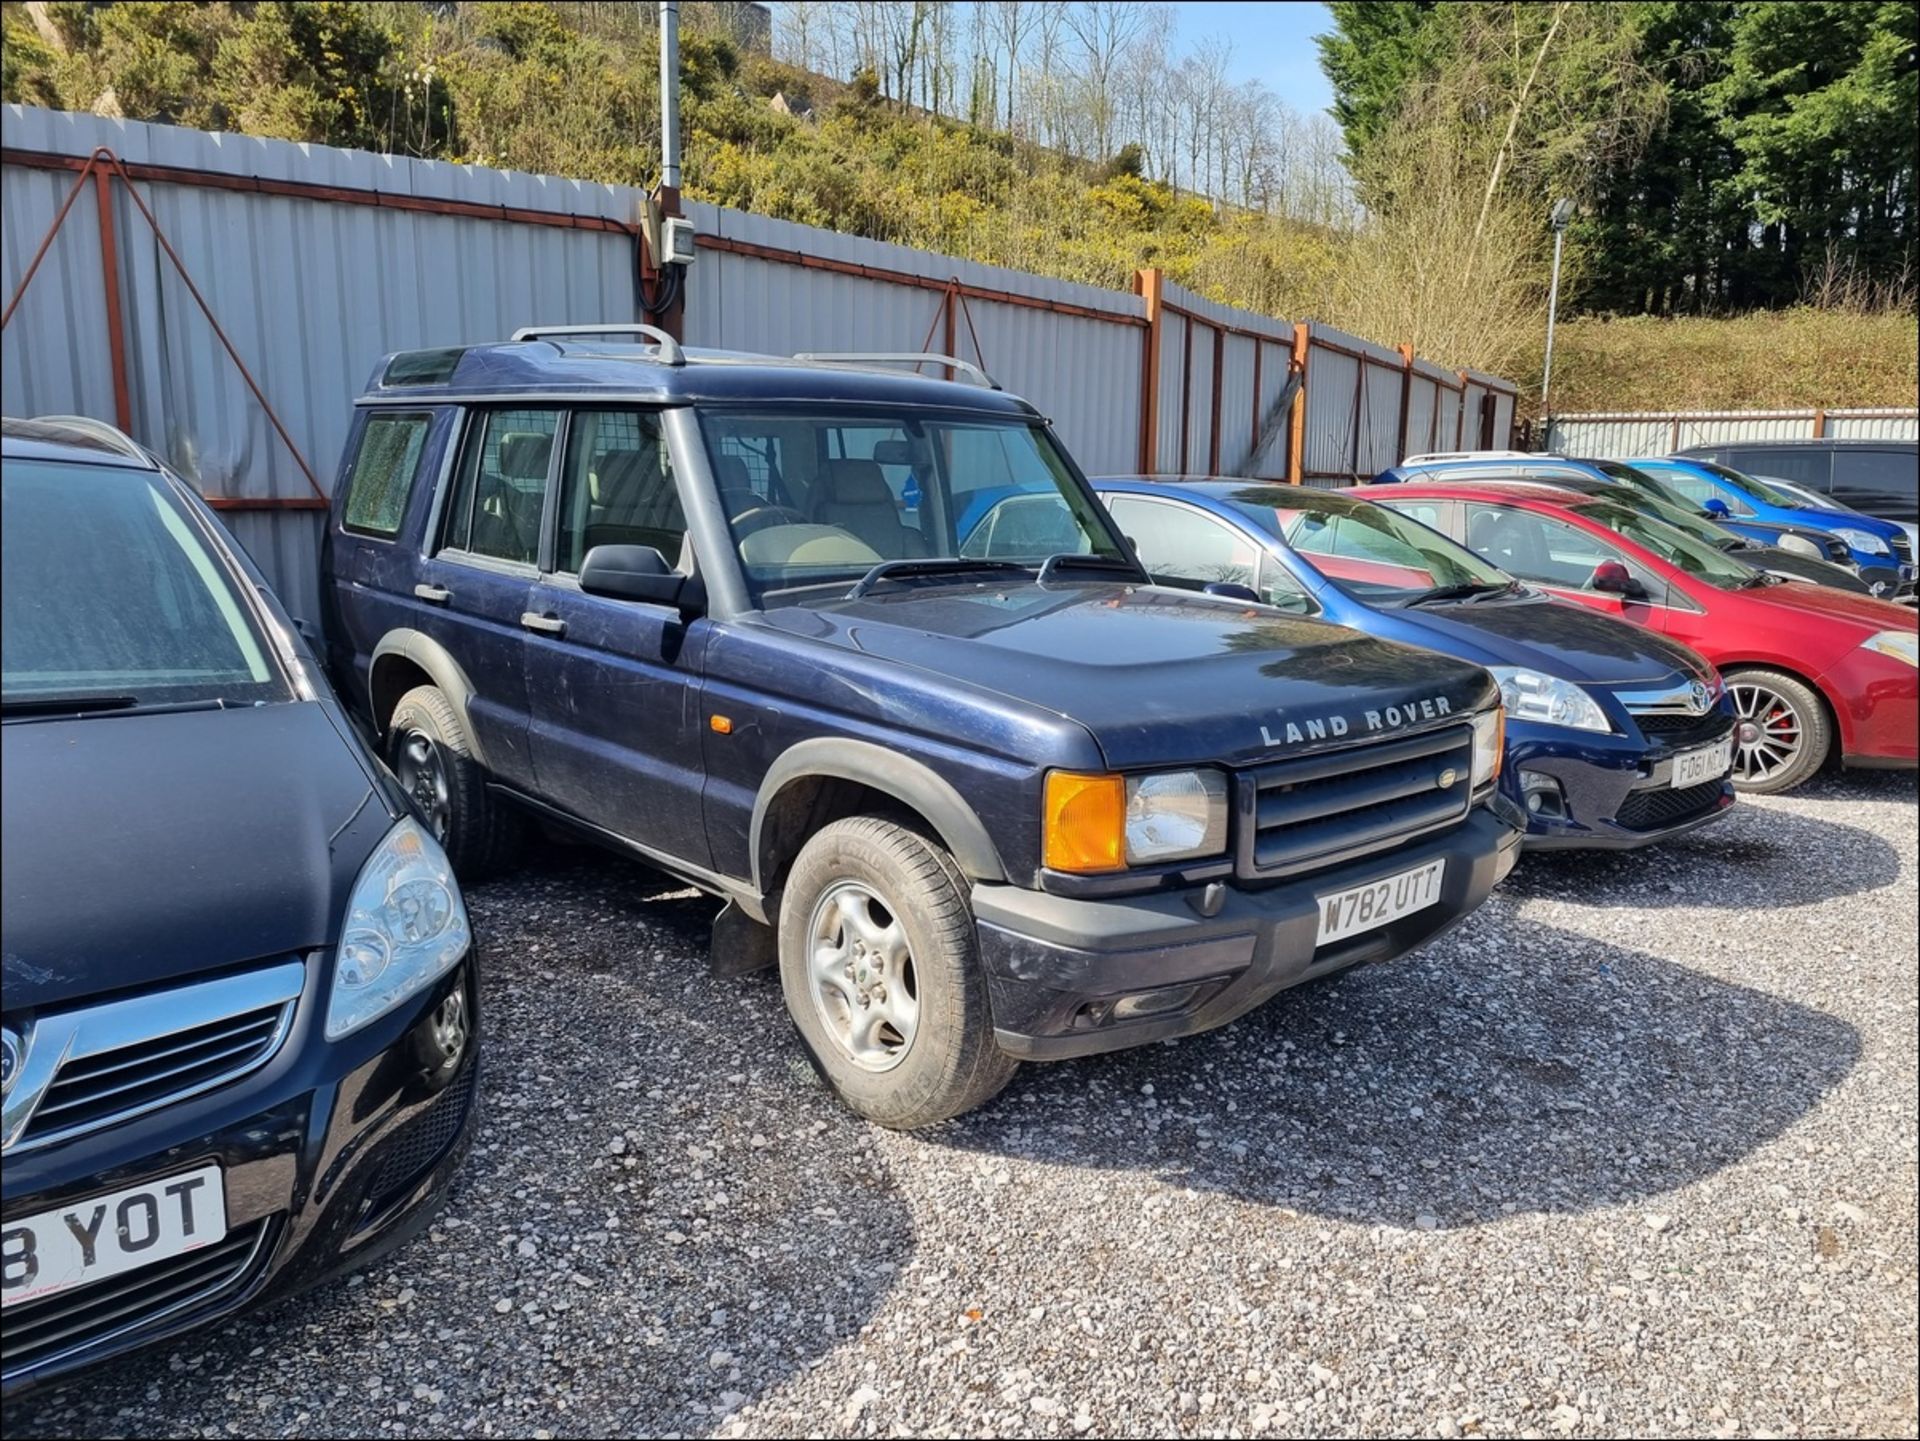 2000 LAND ROVER DISCOVERY - 2500cc 5dr Estate (Blue) - Image 4 of 23